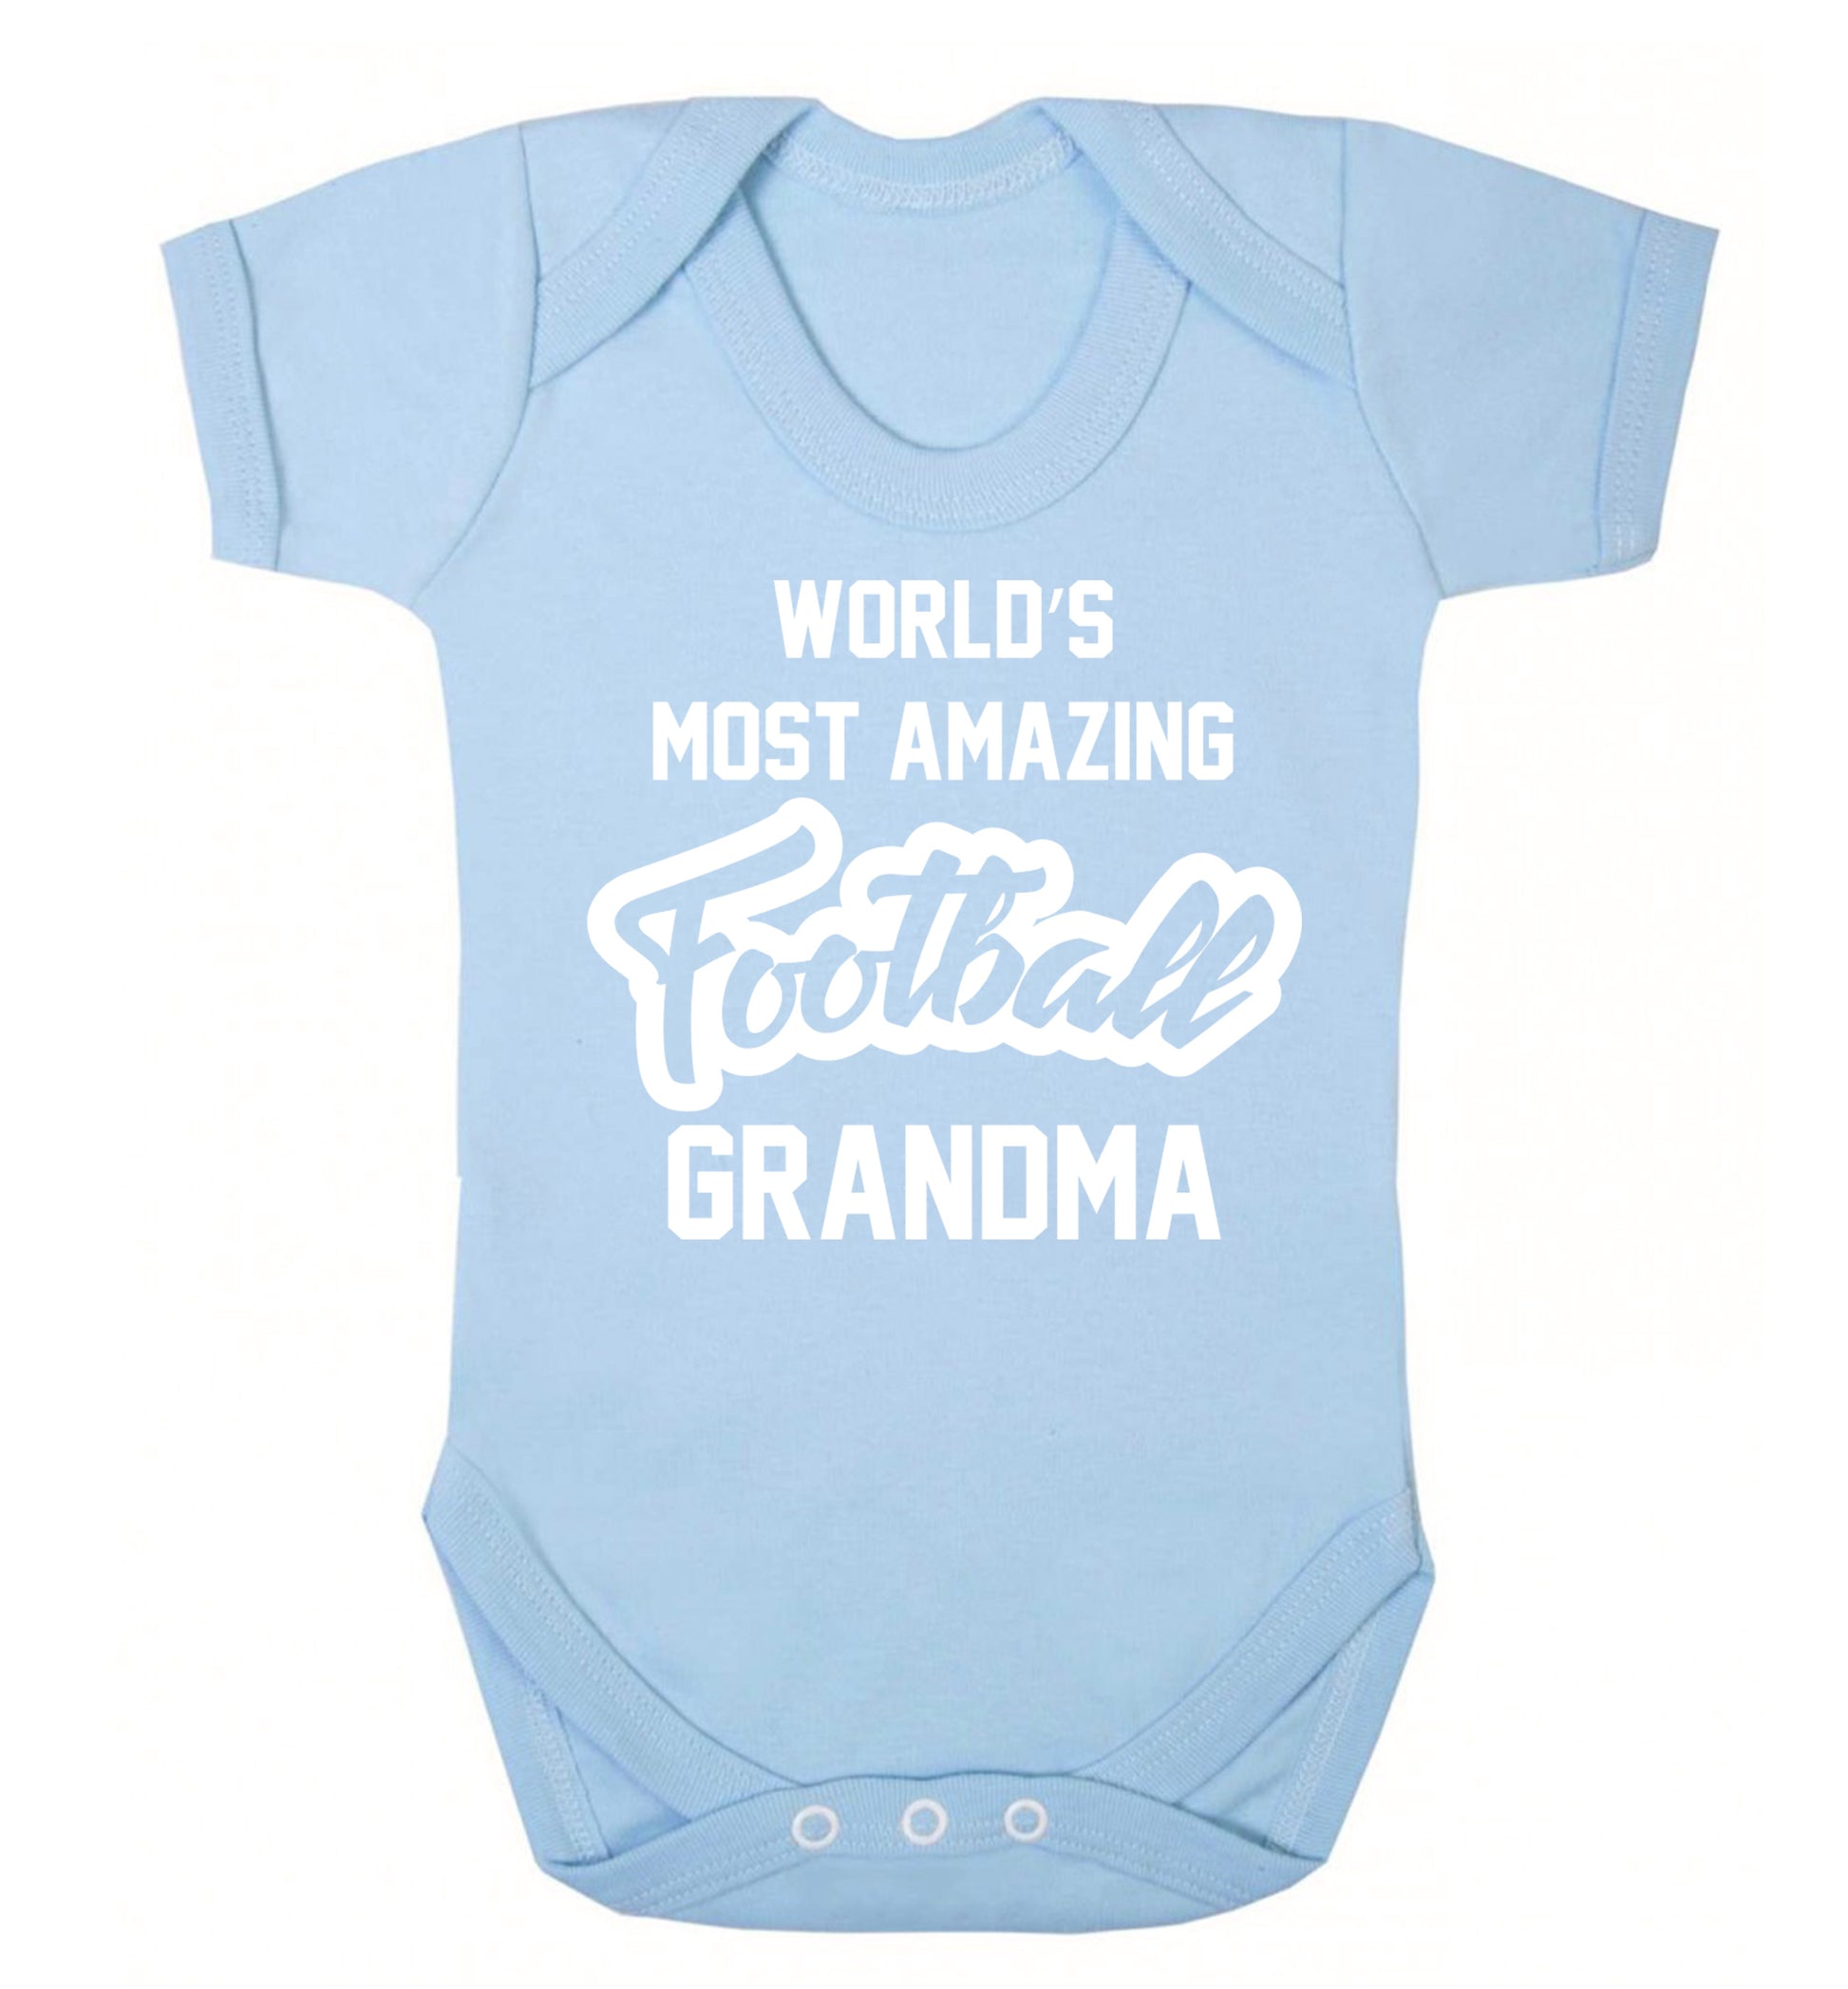 Worlds most amazing football grandma Baby Vest pale blue 18-24 months